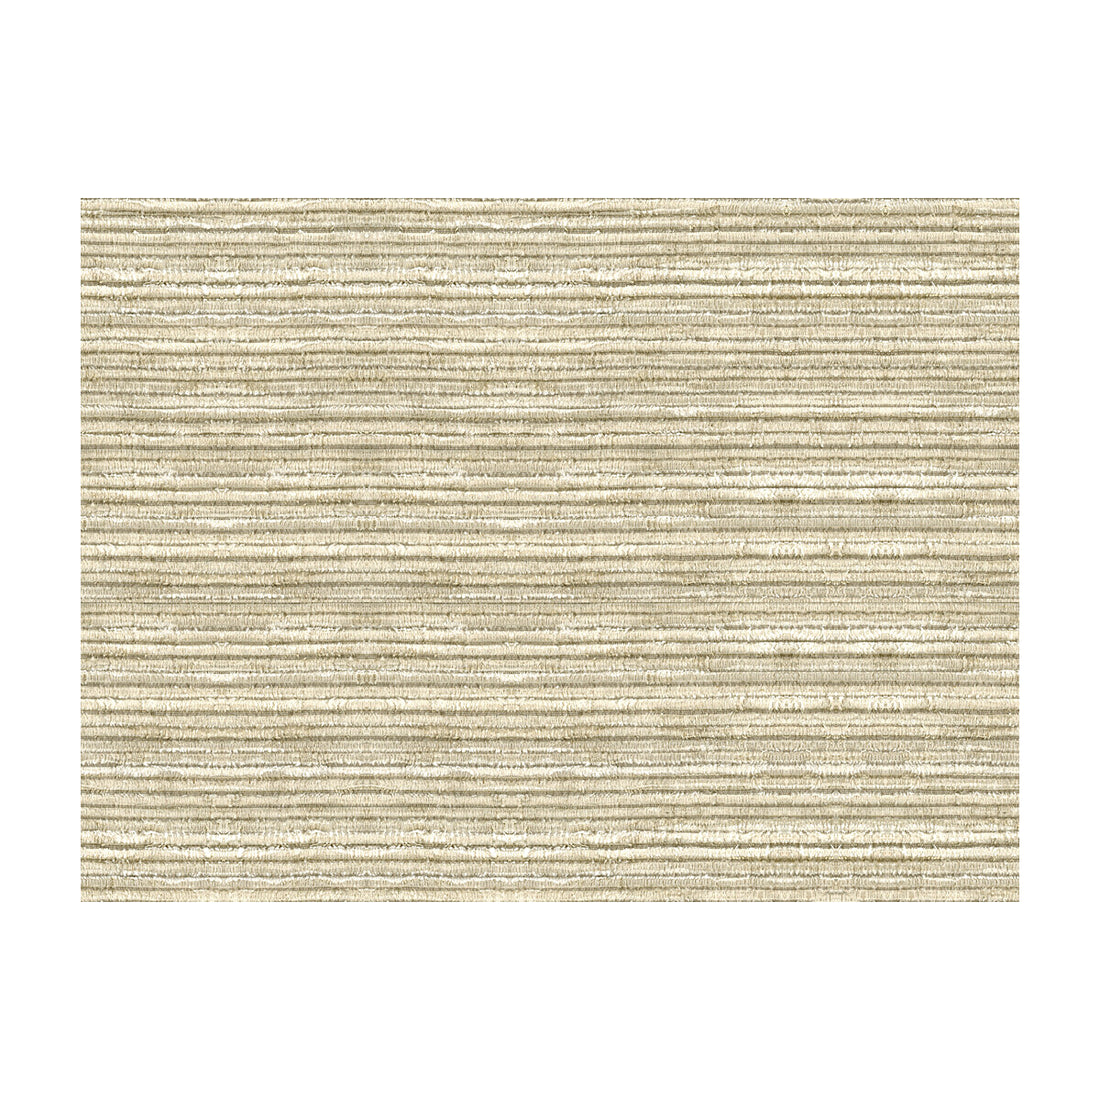 Kravet Couture fabric in 33244-16 color - pattern 33244.16.0 - by Kravet Couture in the Kravet Colors collection